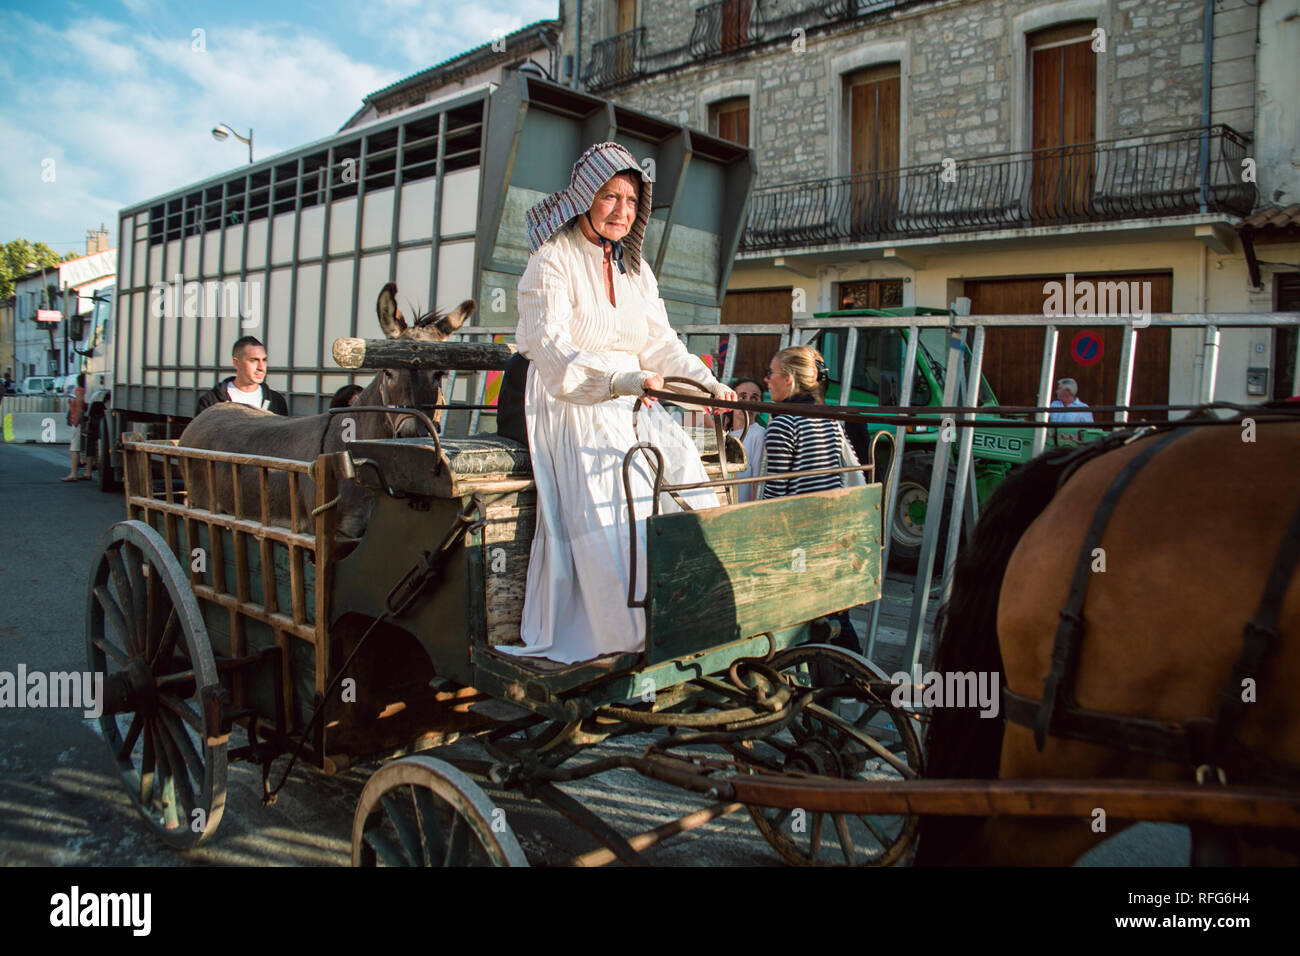 French lady driving horse drawn wagon carrying a mule in the Old School Parade of traditional trades at Annual Fete, Saint Gilles, Gard, France. Stock Photo